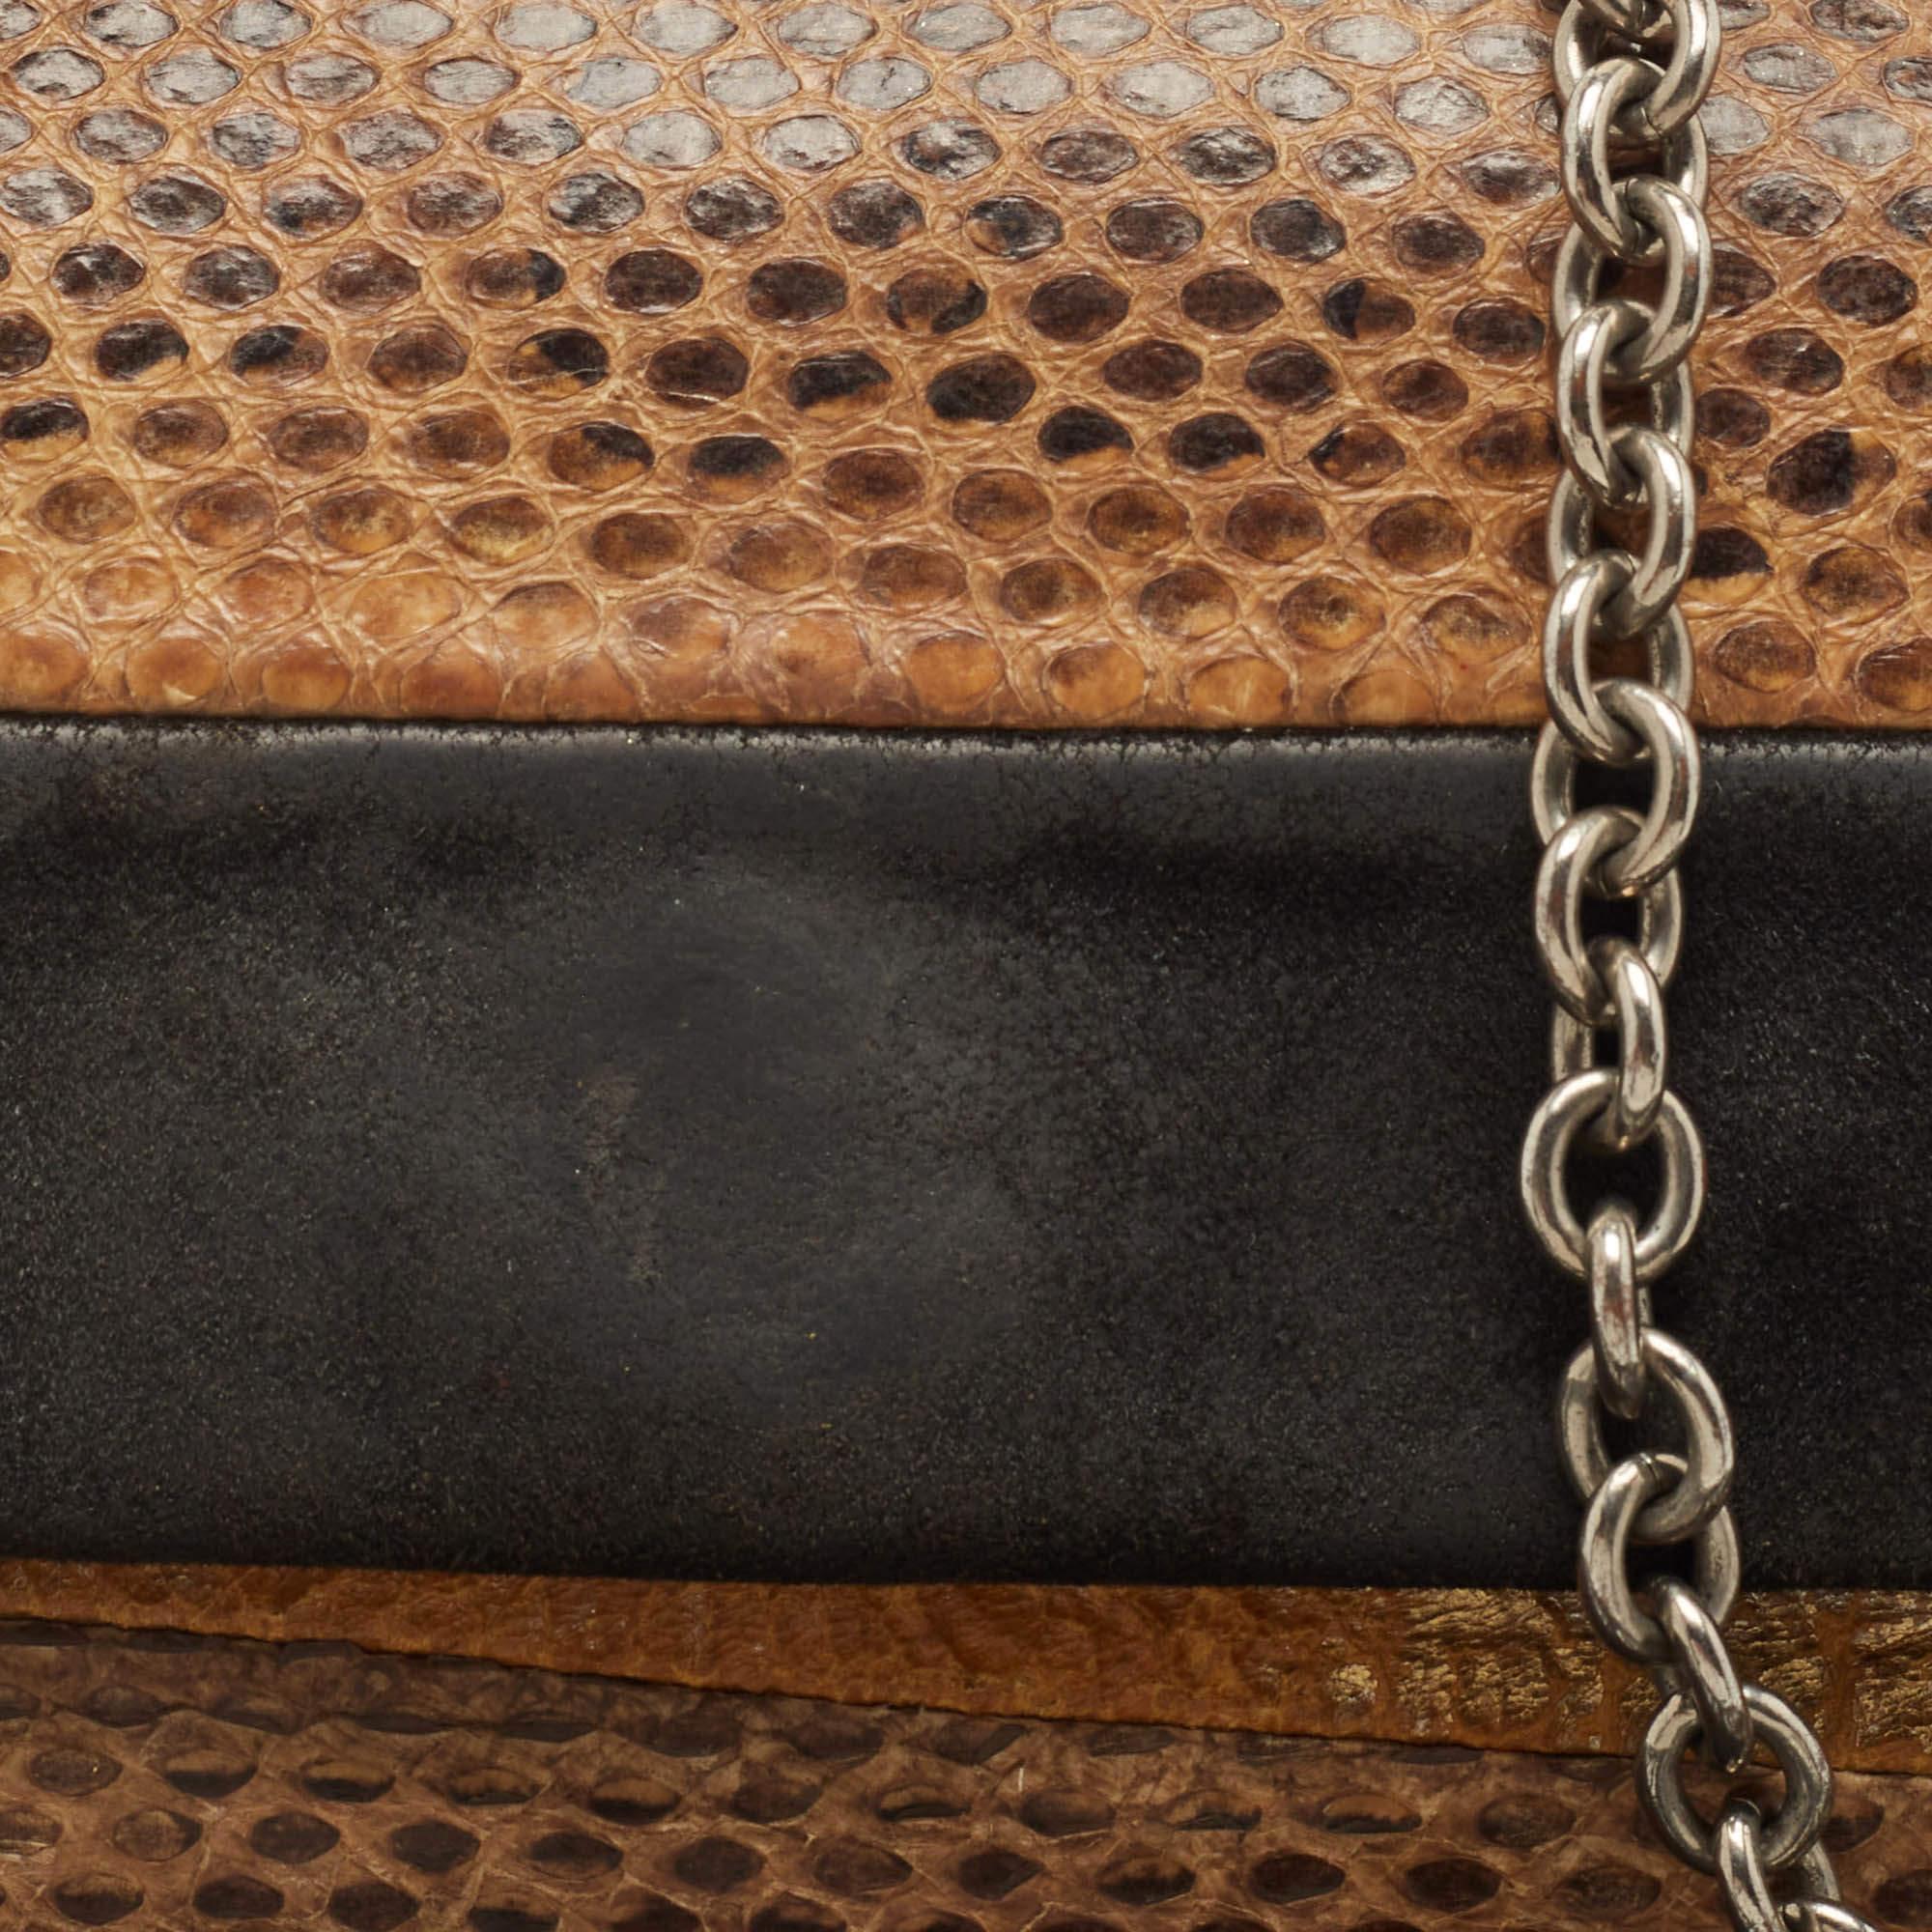 Dolce & Gabbana Black/Brown Suede And Snakeskin Leather Chain Clutch For Sale 9